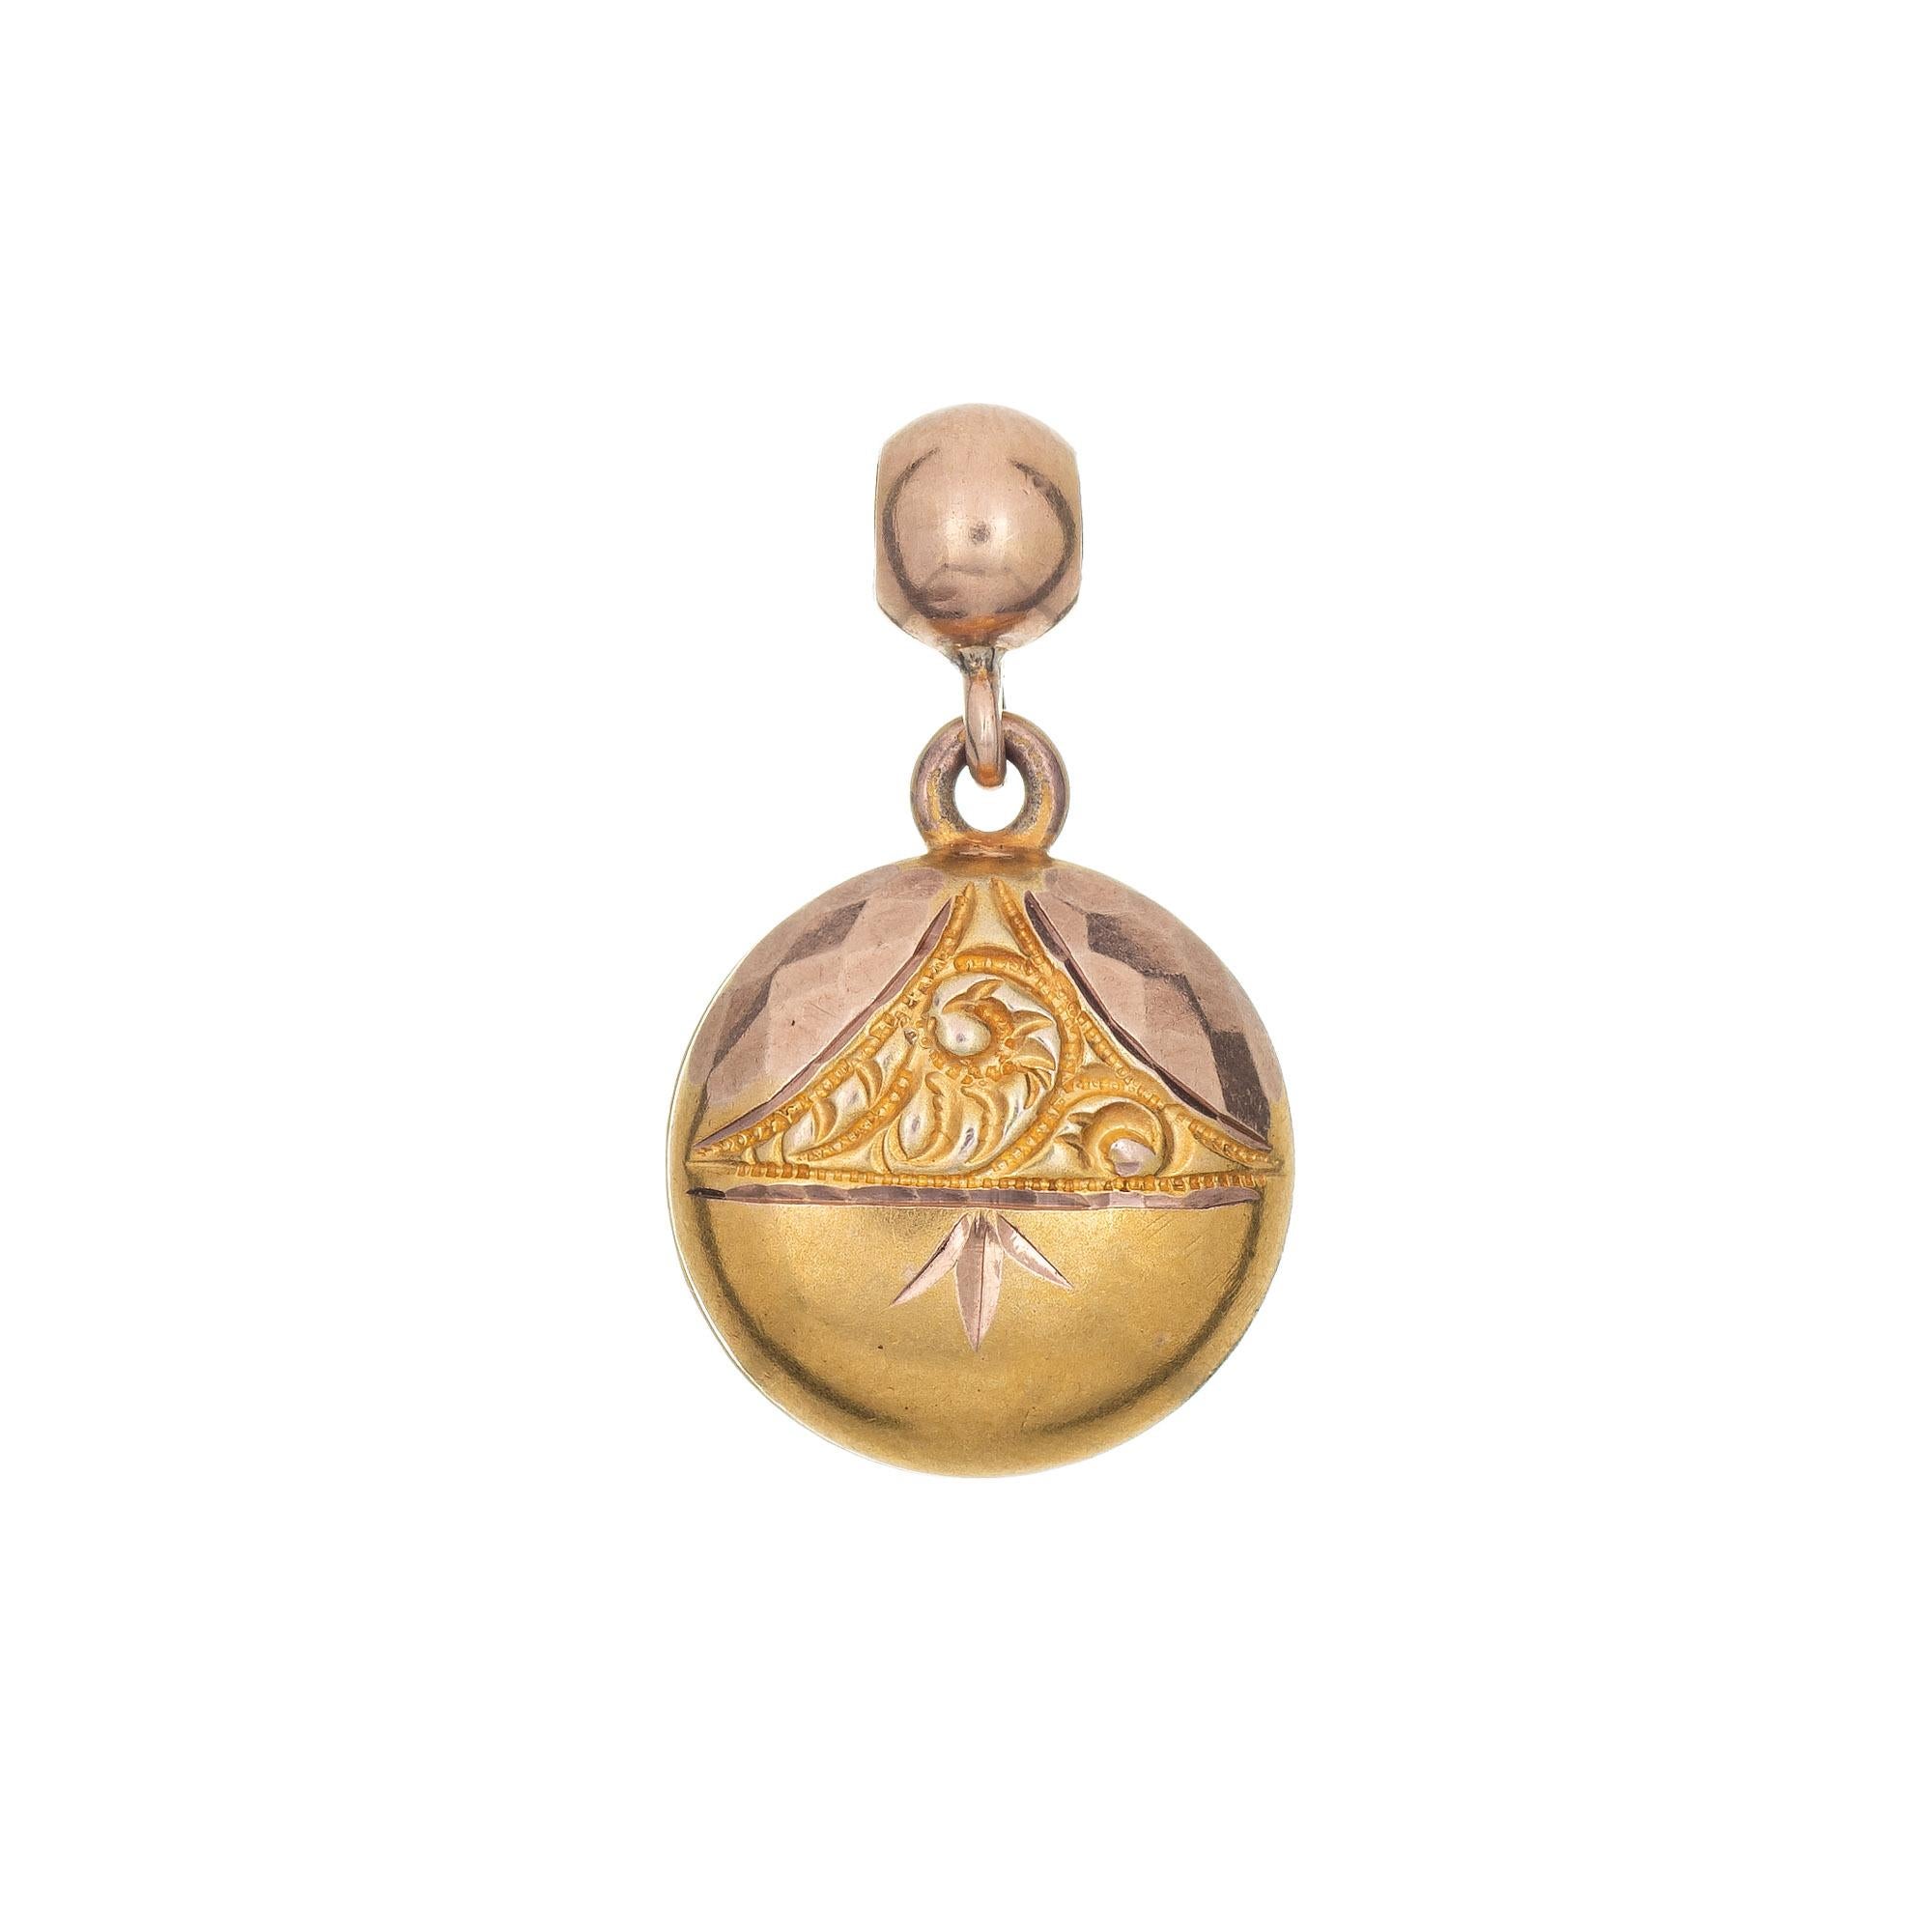 Finely detailed Victorian pendant or charm (circa 1880s to 1900s), crafted in 10 karat yellow gold. 

The small pendant features hand etched & chased detail to both sides. Small in scale (1/2 inch) the pendant is great worn as a pendant on a chain